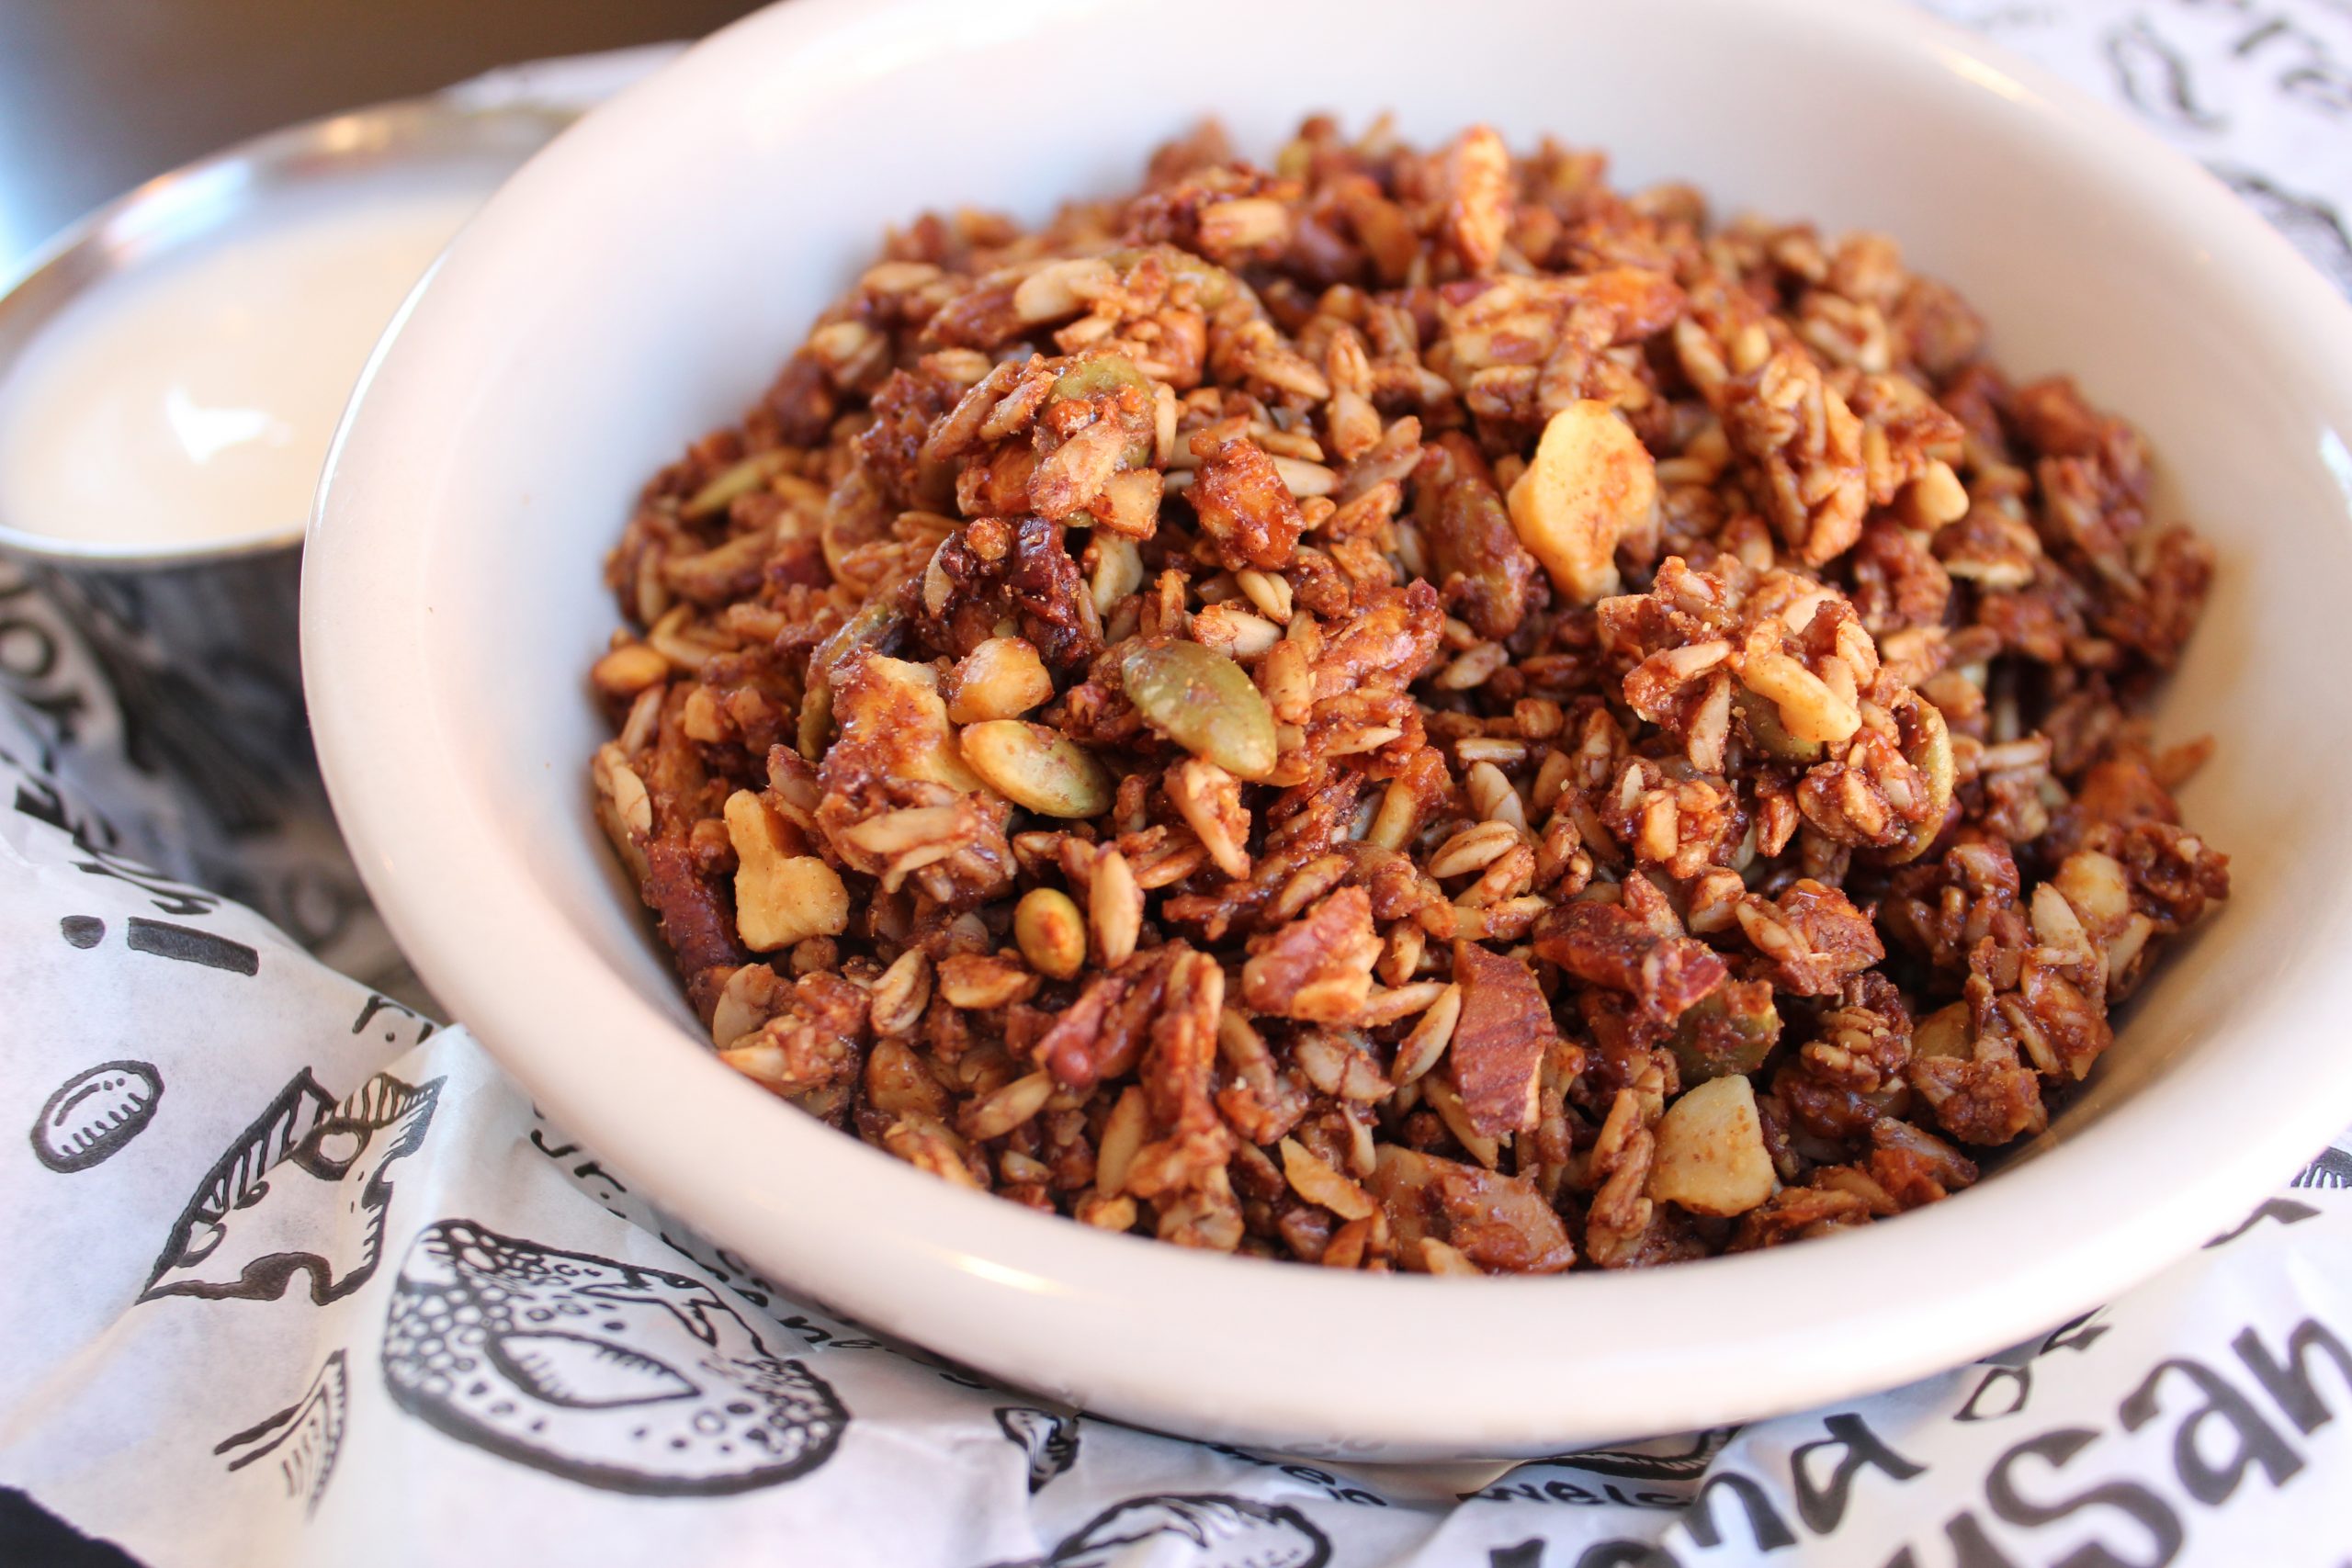 G’s Granola, an exclusive from the Deli kitchen